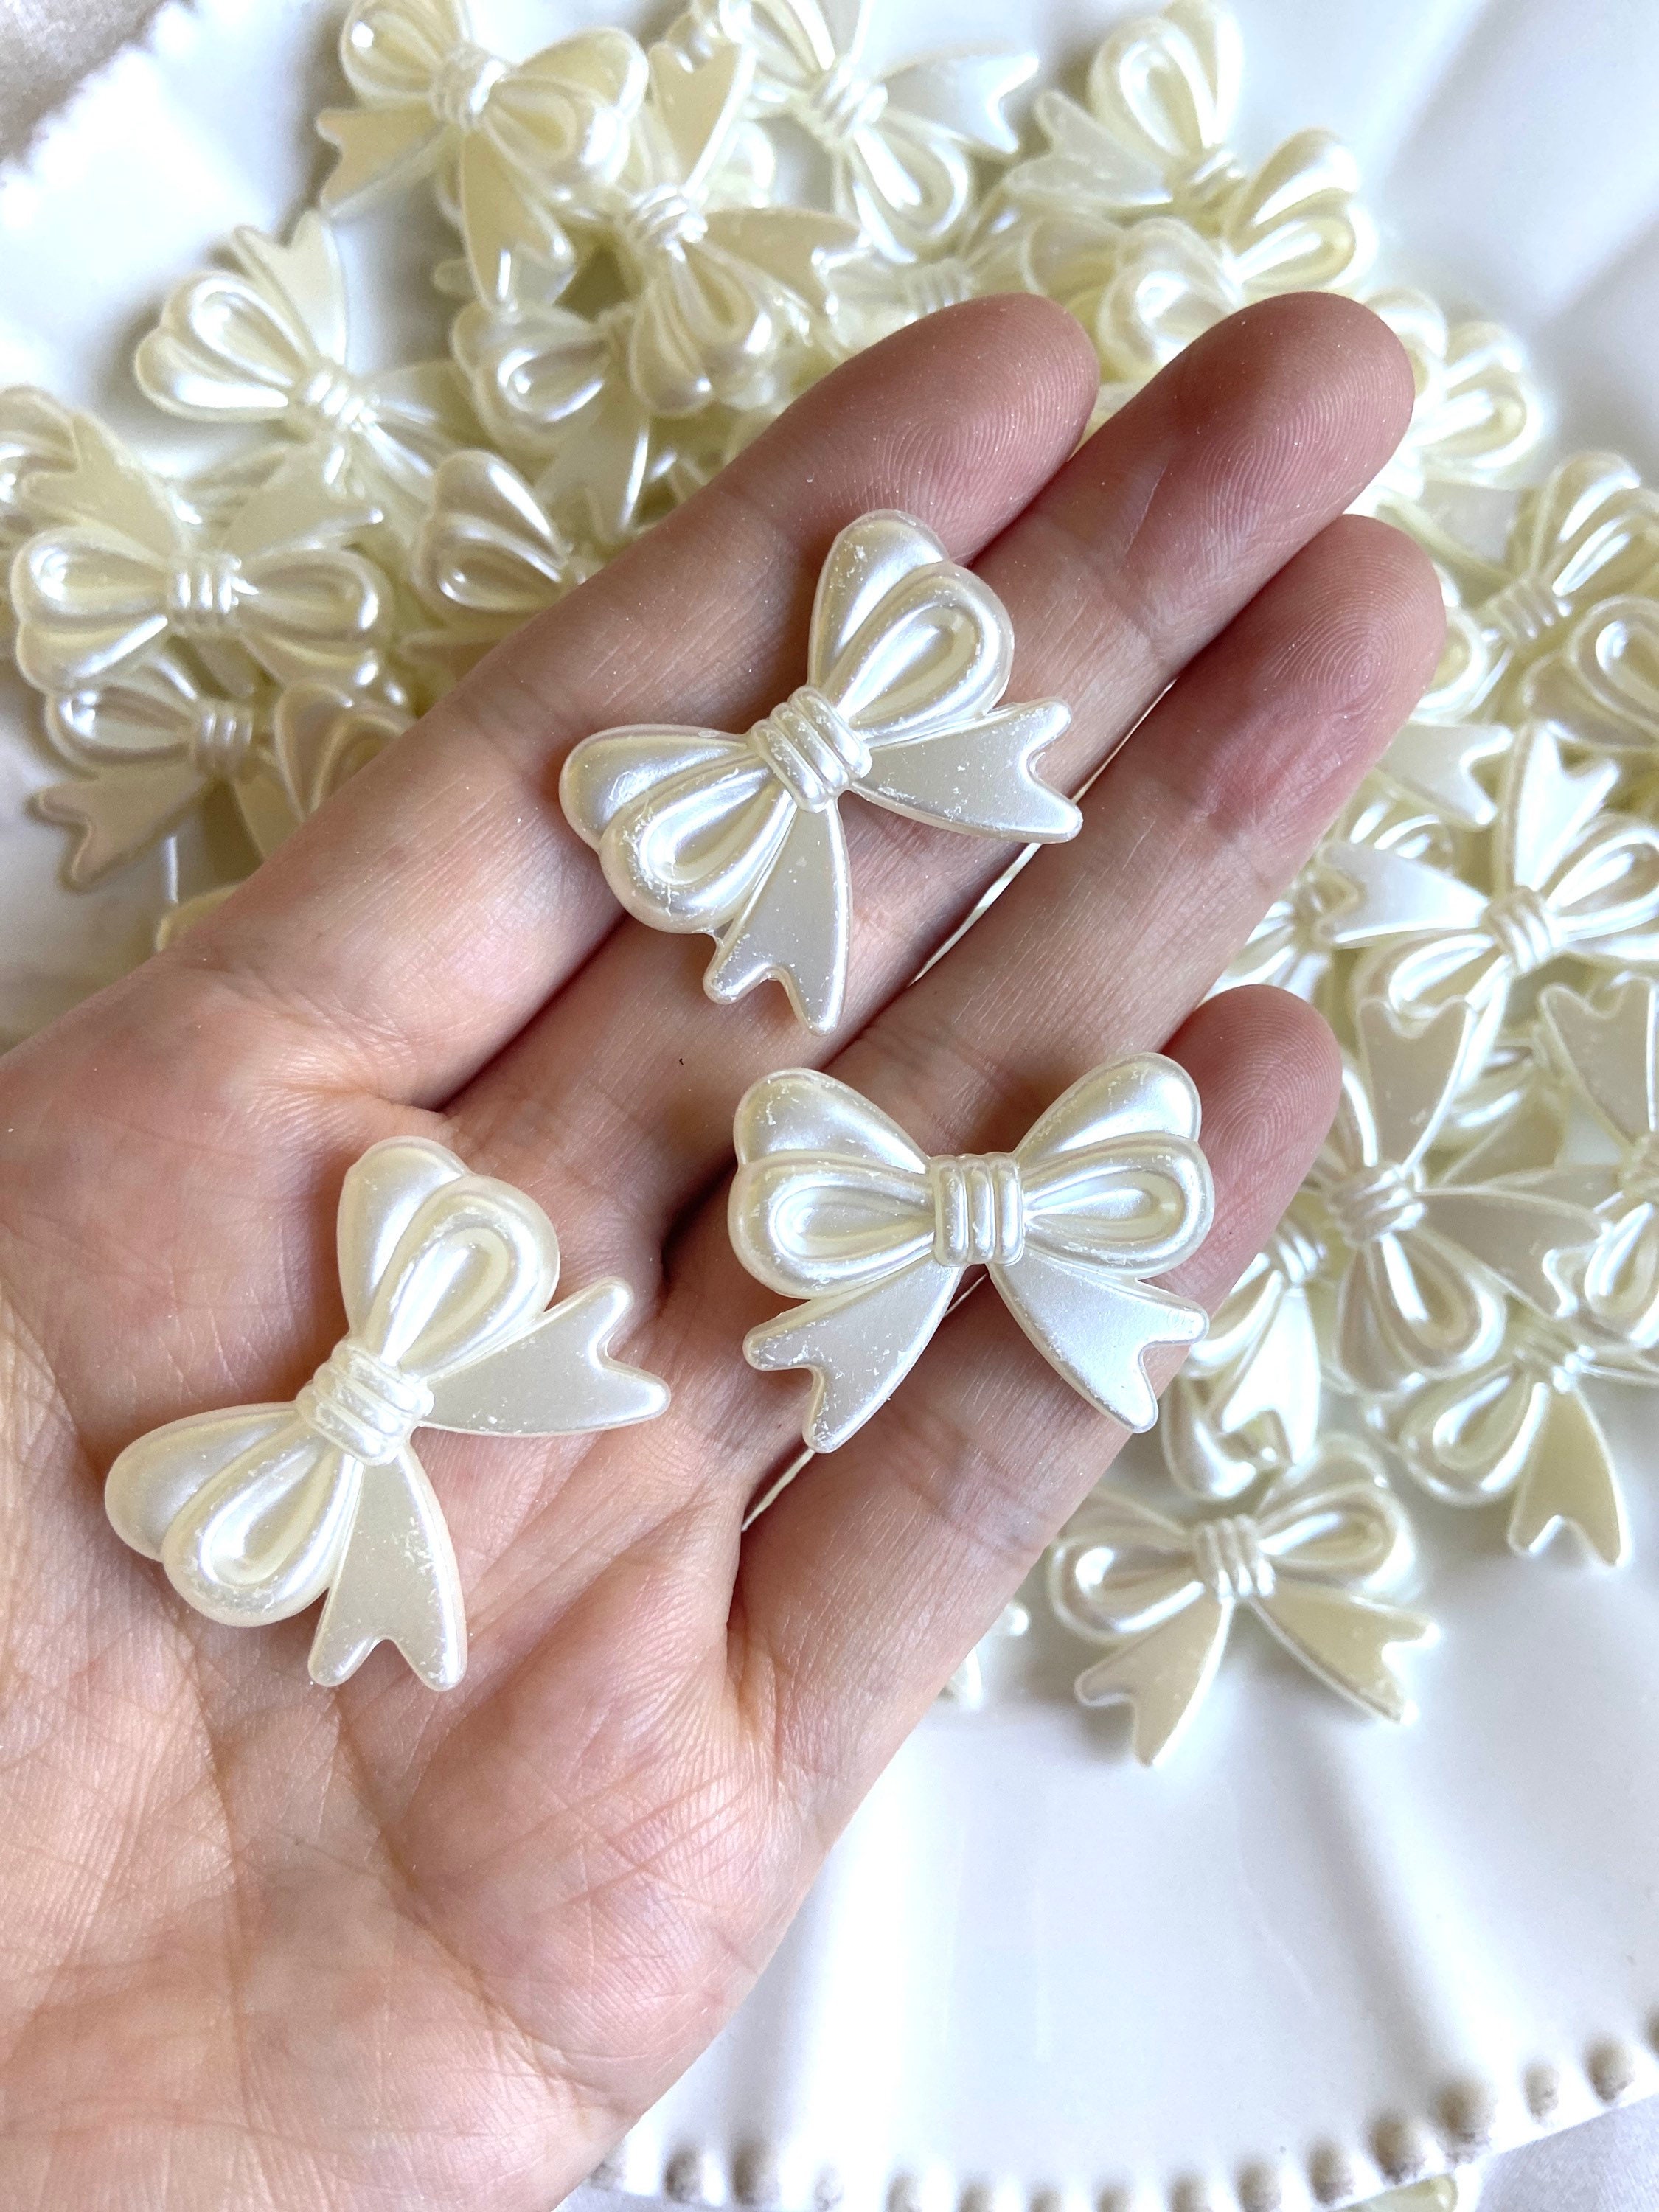 5 29mm Gold Bow Beads Acrylic Bow Charms by Smileyboy | Michaels